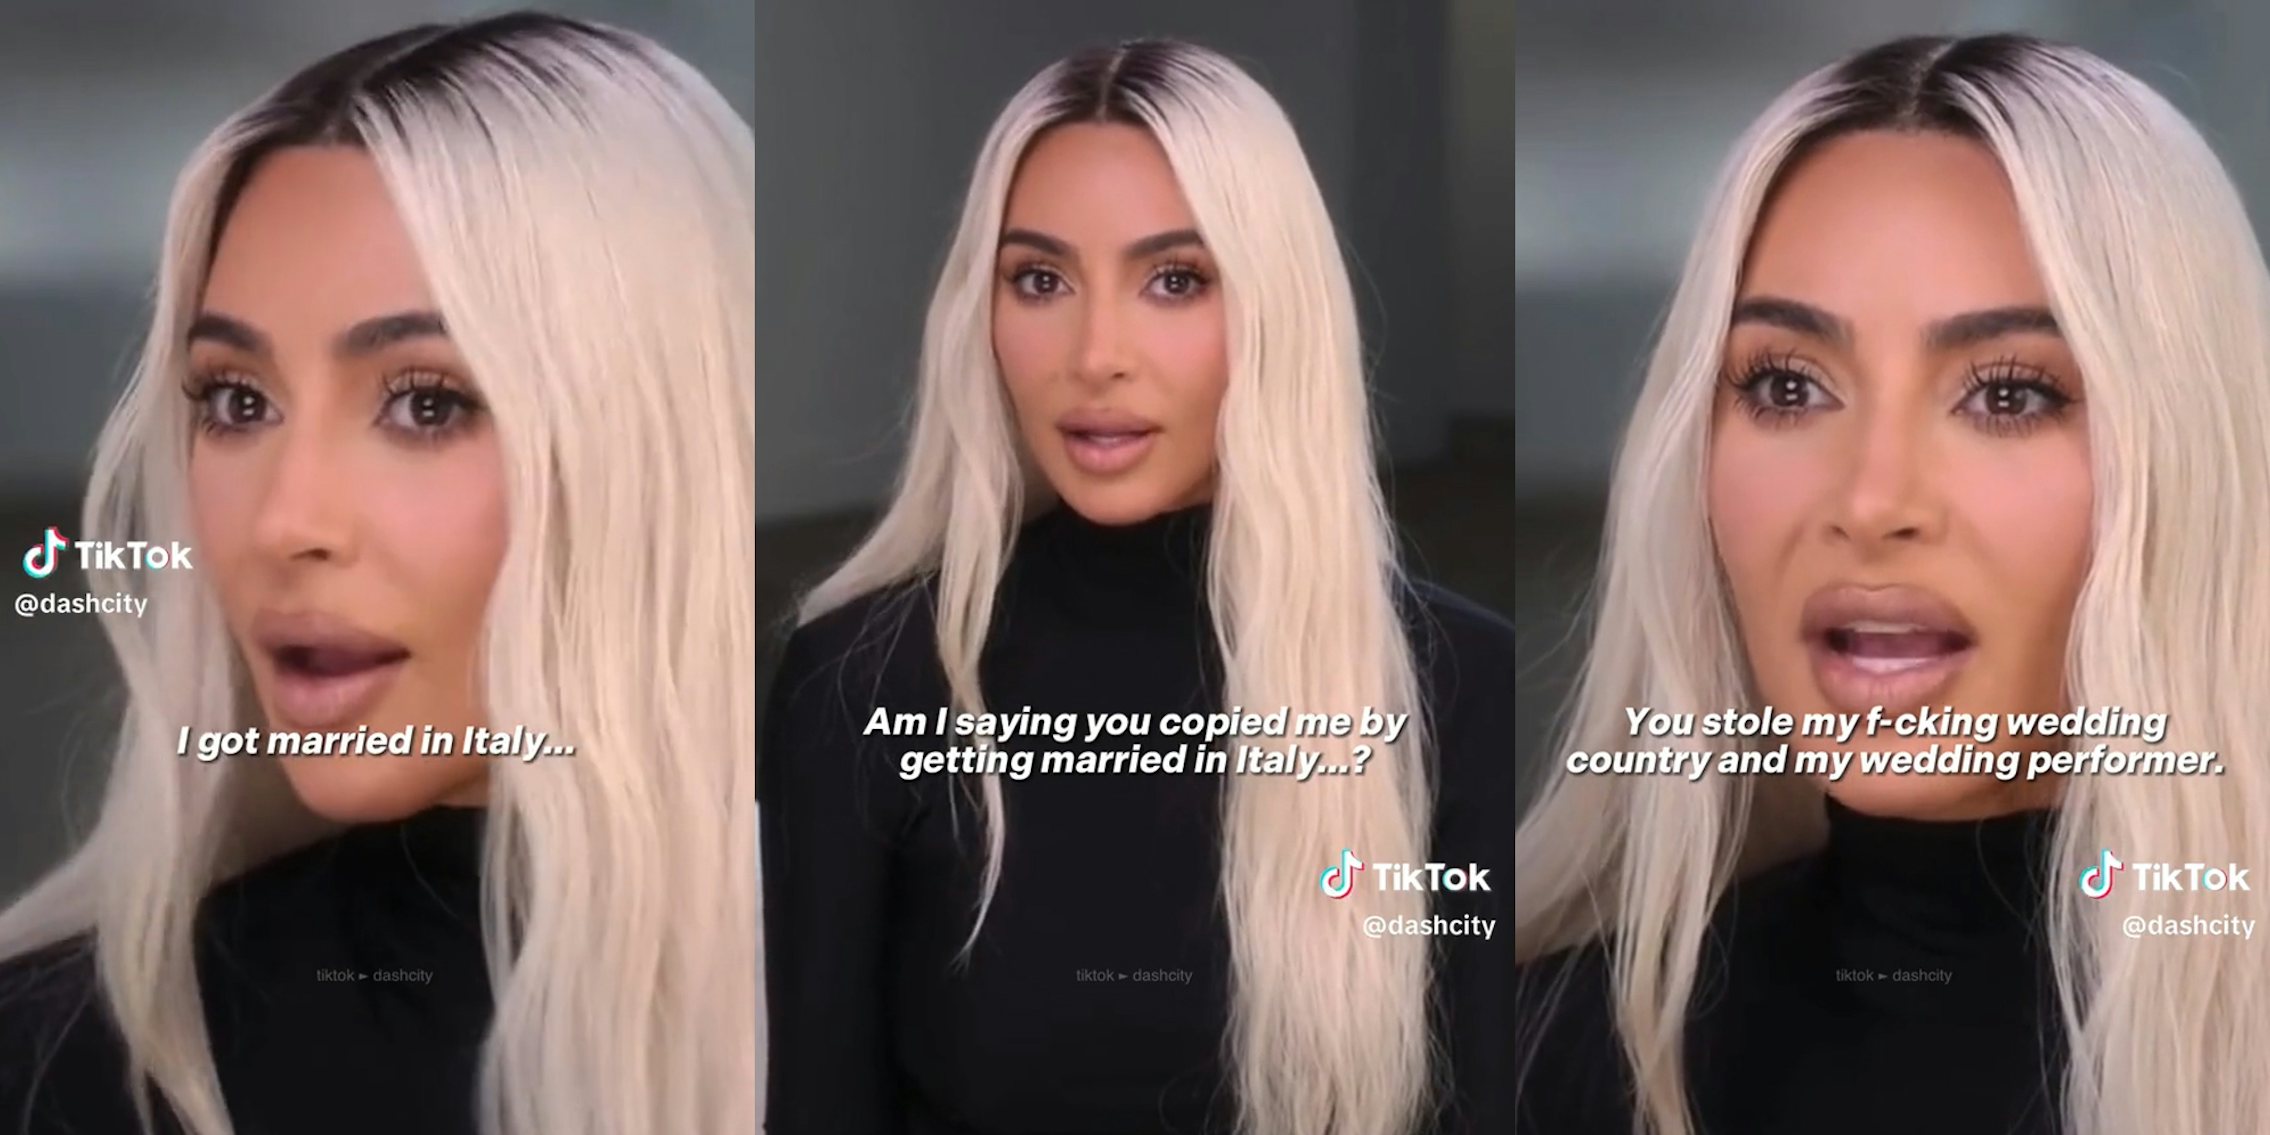 kardashian with captions 'I got married in Italy.. Am I saying you copied me by getting married in Italy? You stole my f-cking wedding country and my wedding performer.'